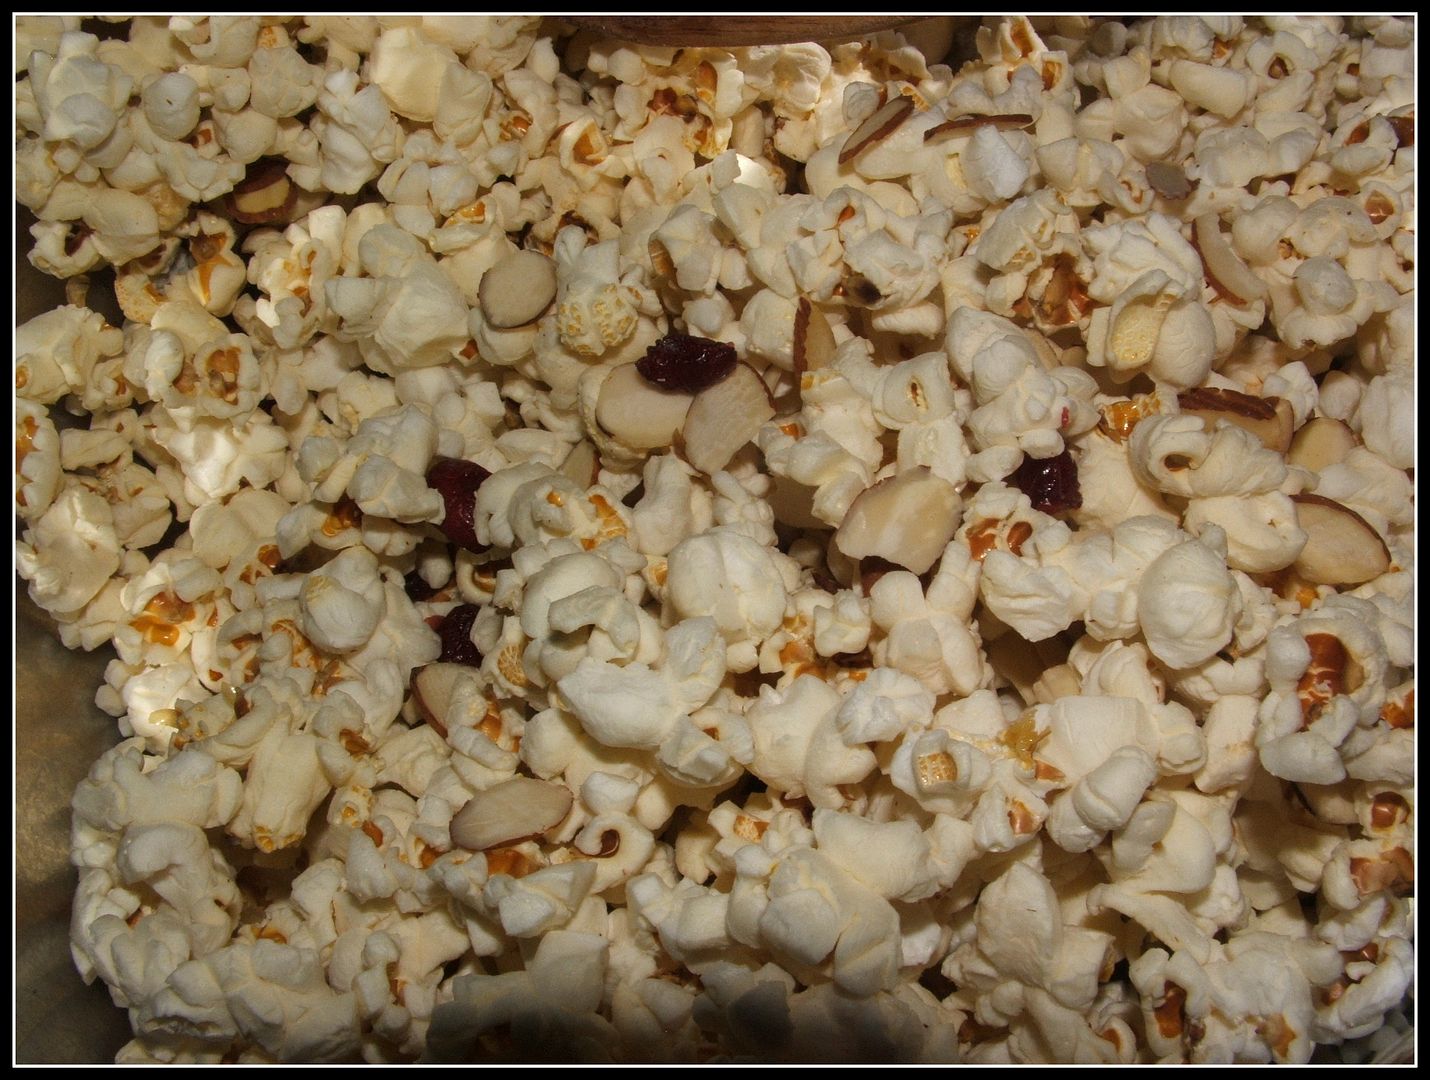 caramel popcorn by Angie Ouellette-Tower for godsgrowinggarden.com photo 001_zps877fff43.jpg